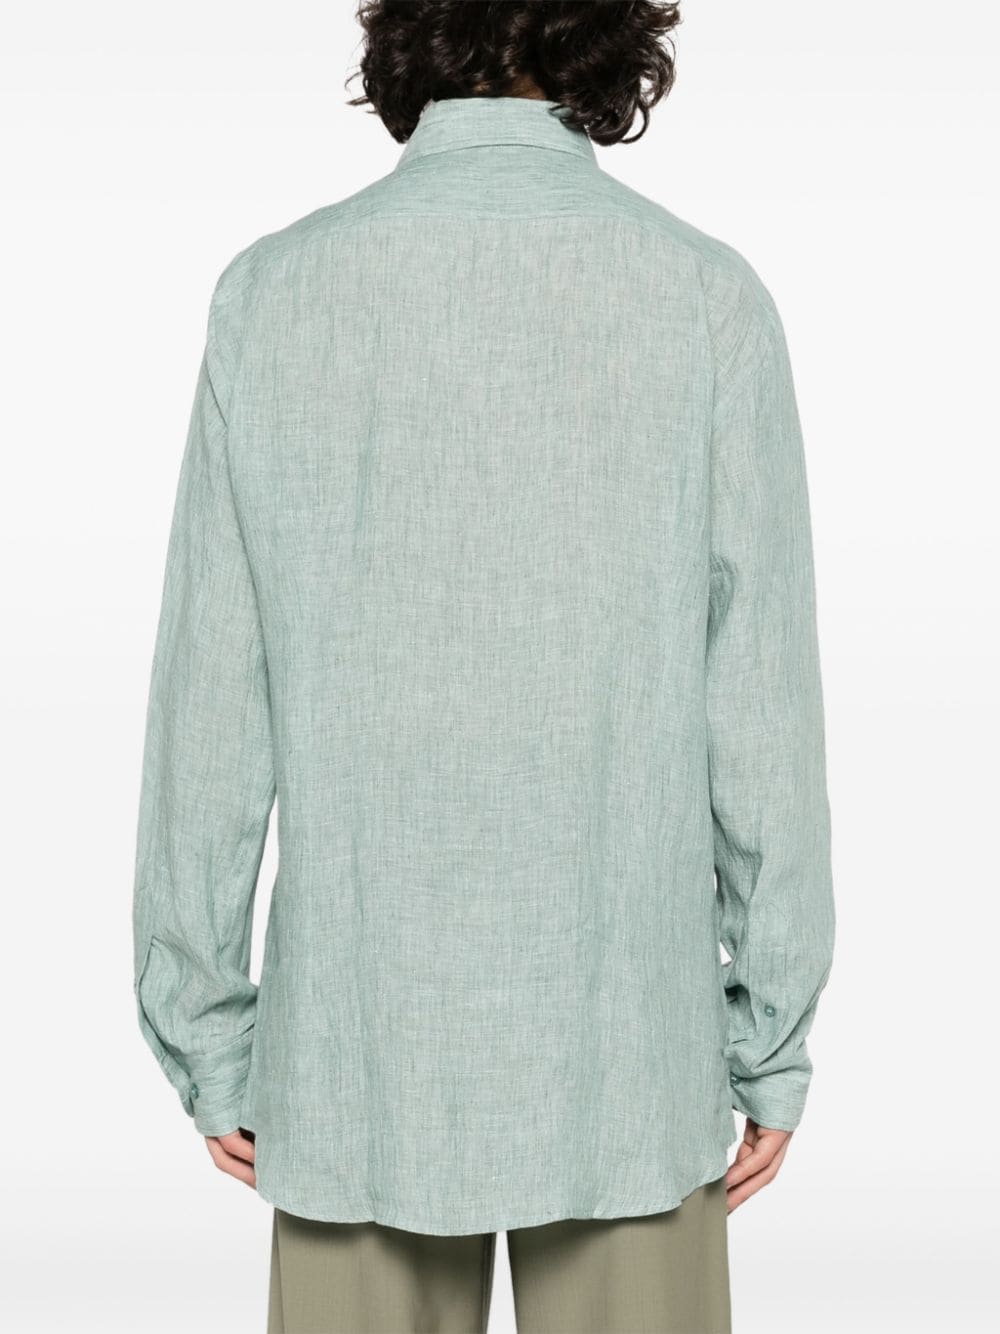 Pegaso-embroidered linen shirt<BR/><BR/><BR/>